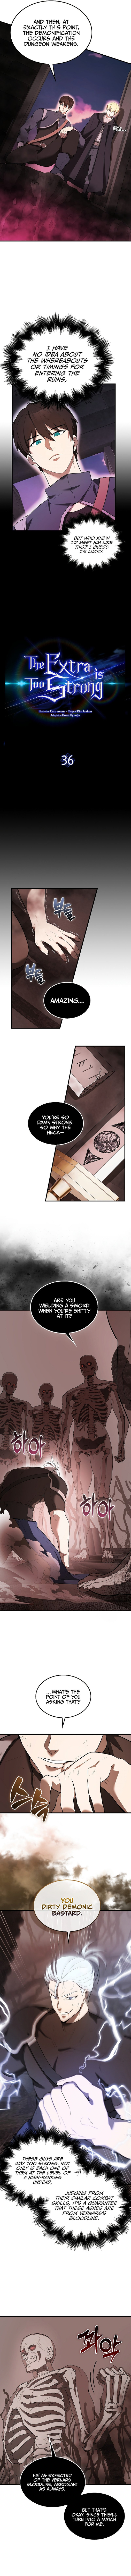 the-extra-is-too-strong-chap-37-4